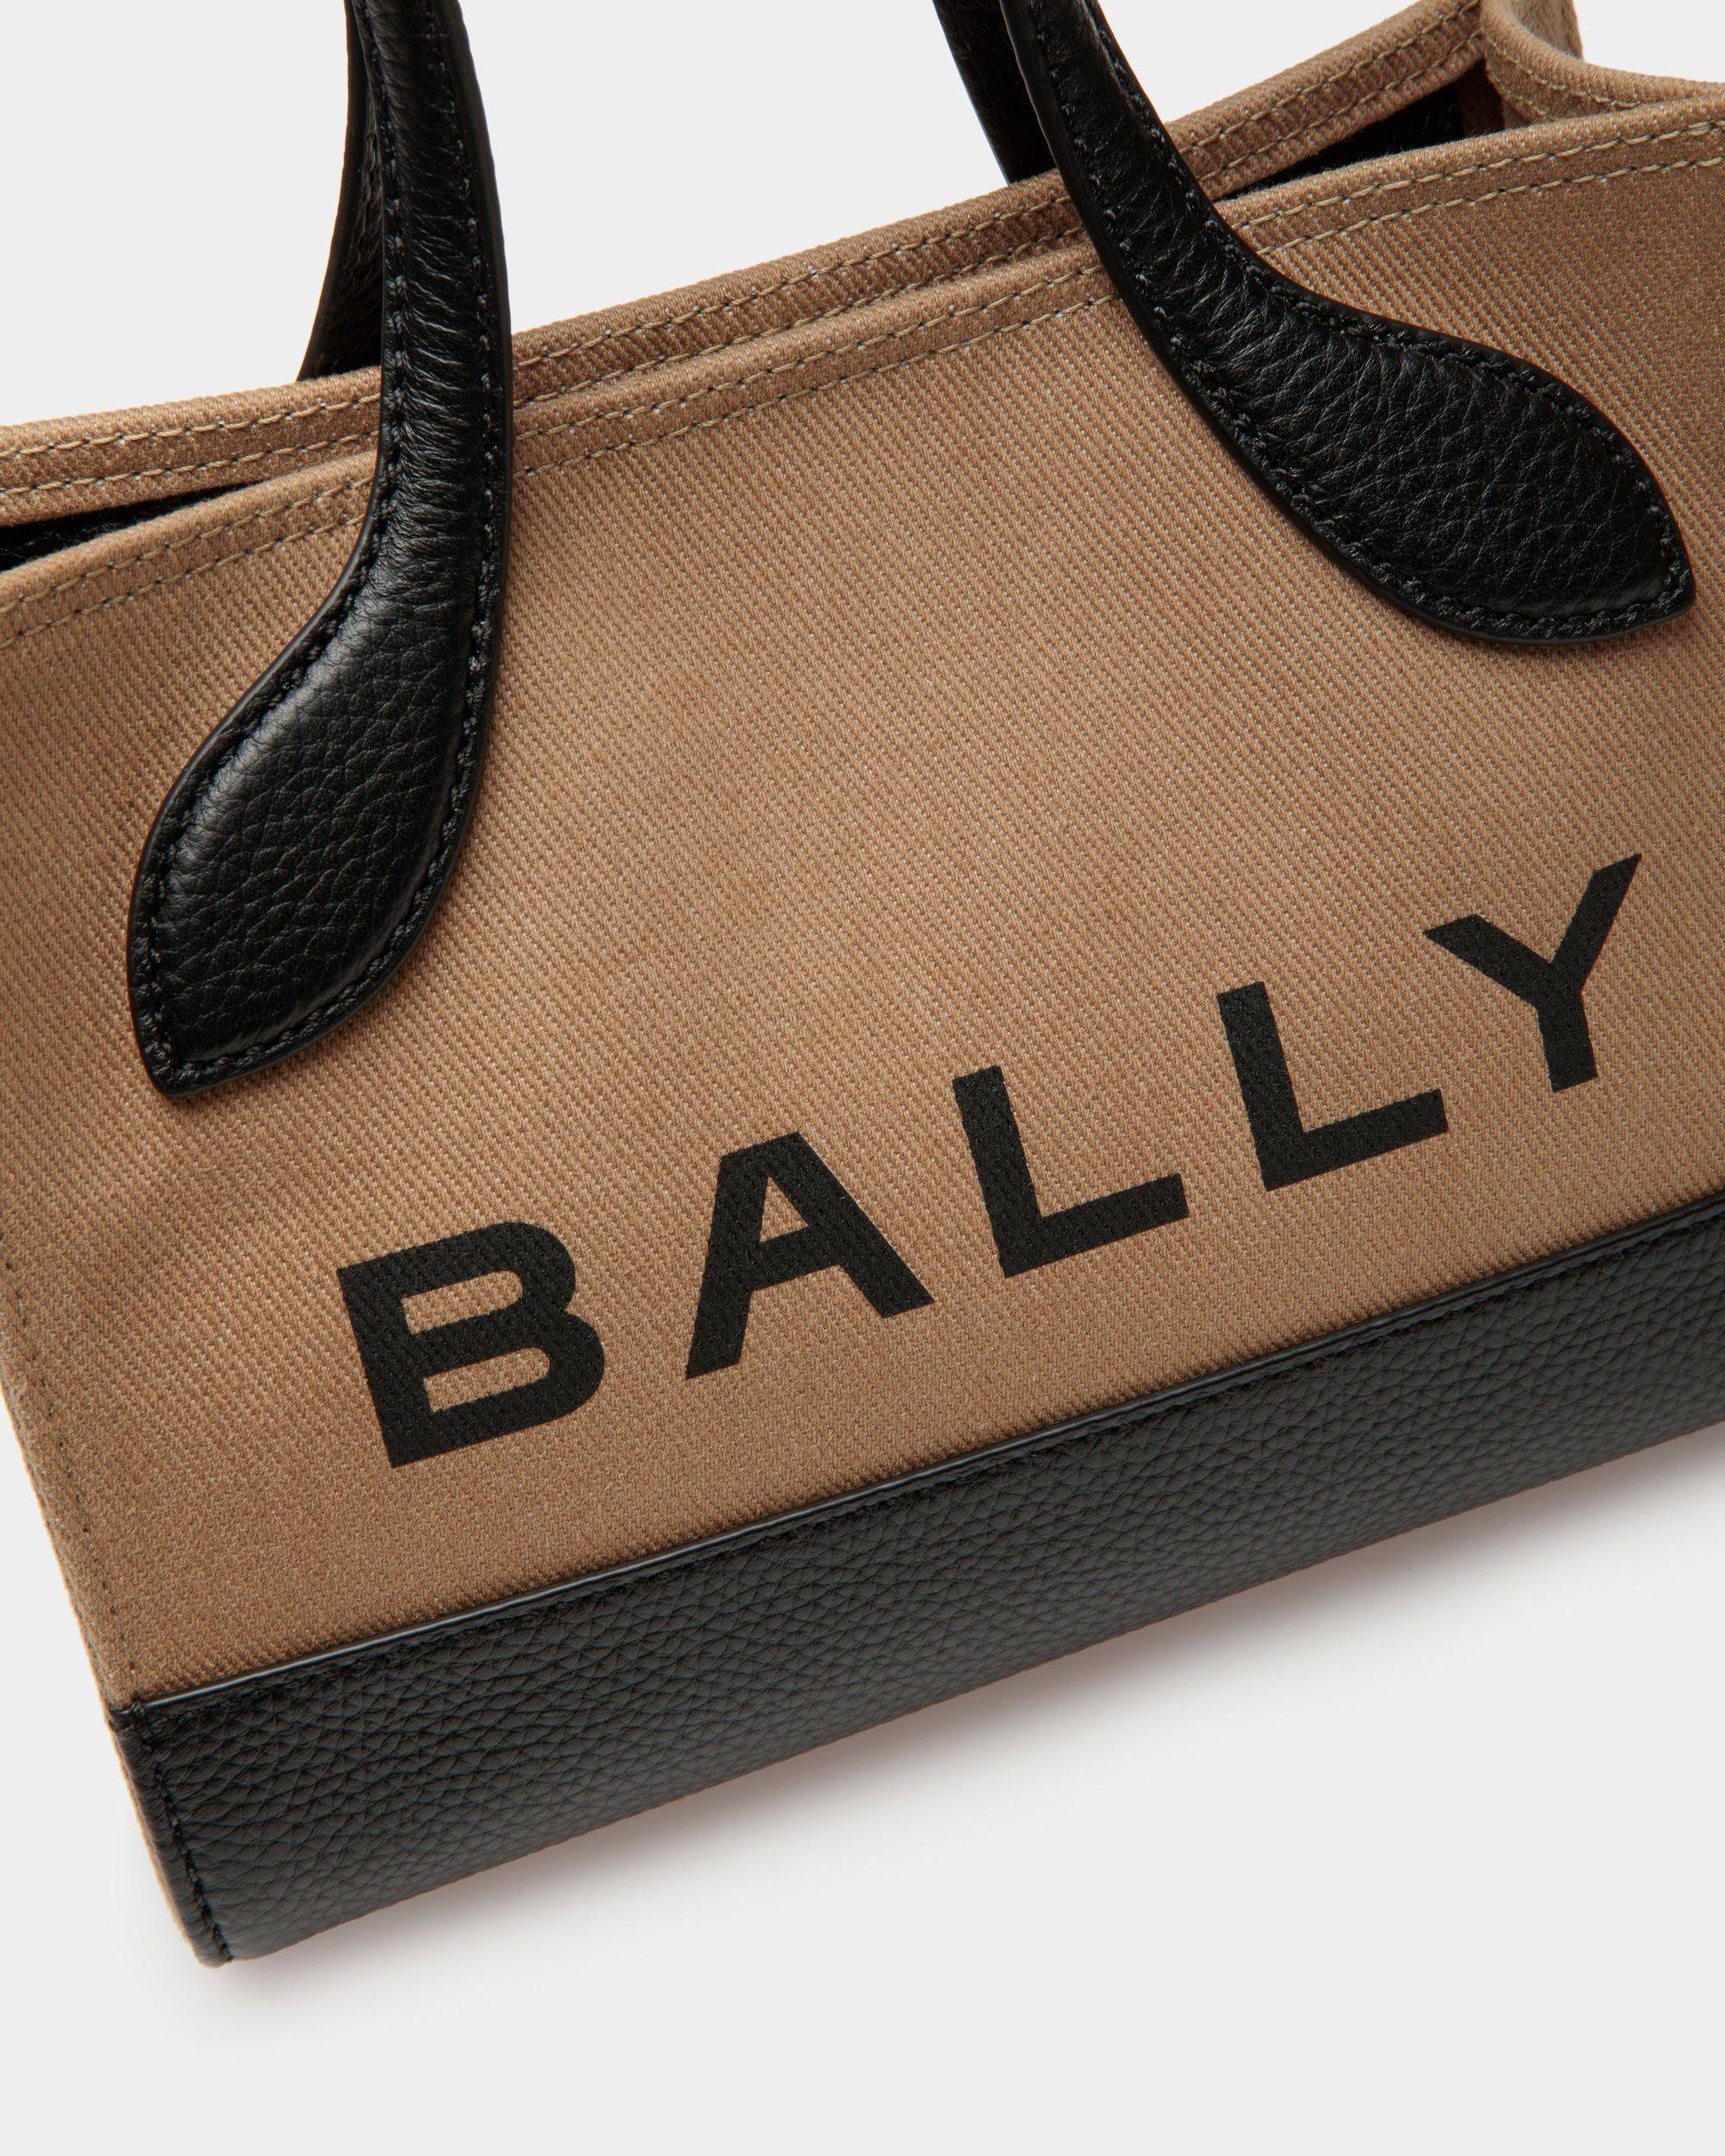 Bar Keep On Extra Small | Women's Minibag | Sand And Black Fabric | Bally | Still Life Detail